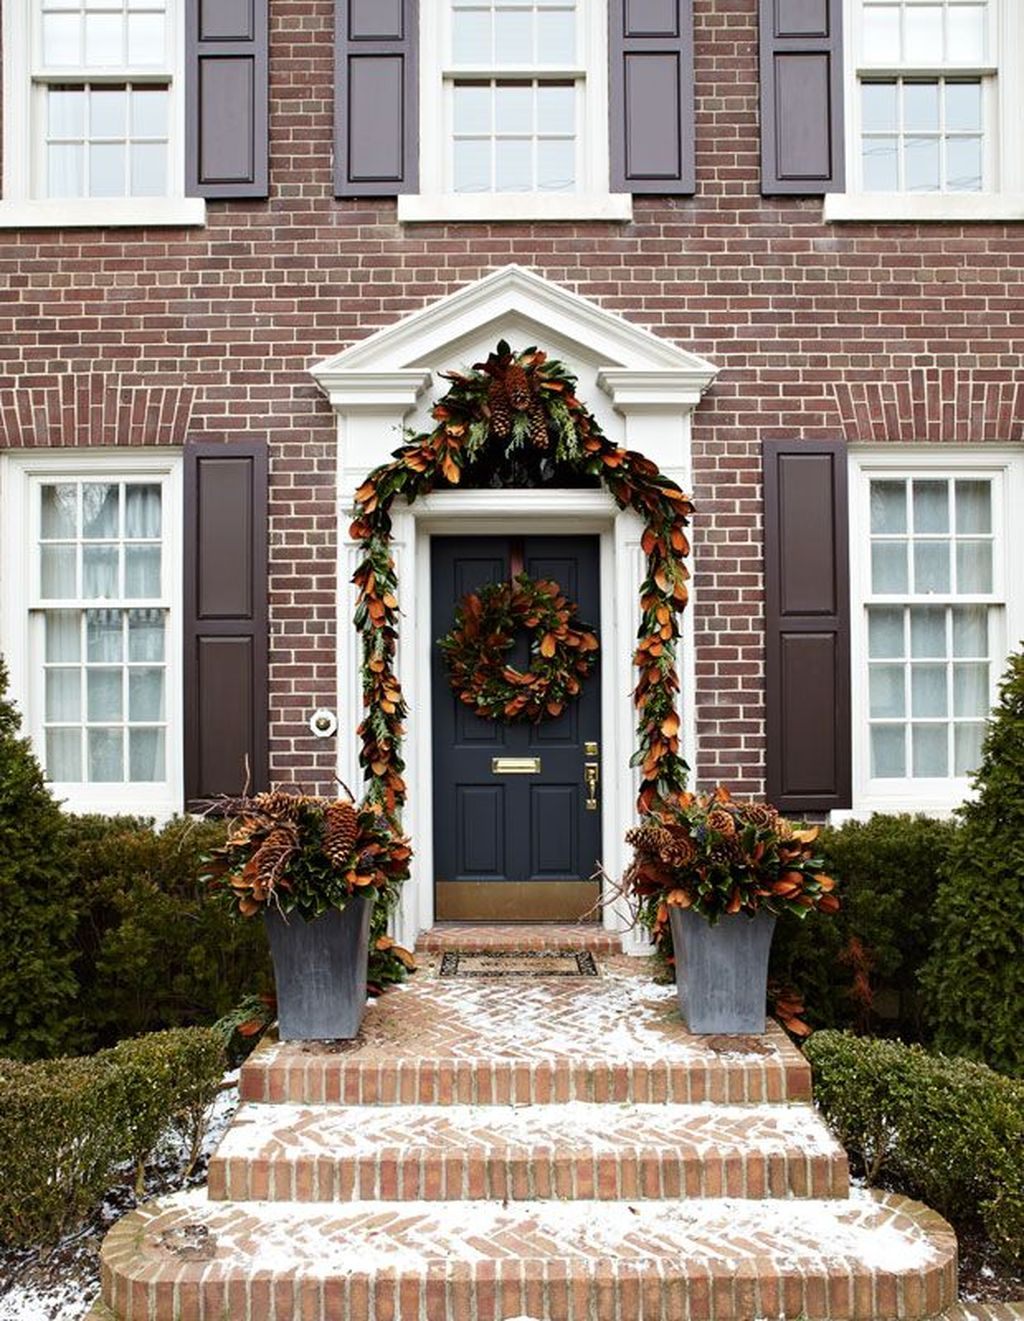 Marvelous Outdoor Holiday Planter Ideas To Beauty Porch Décor 02